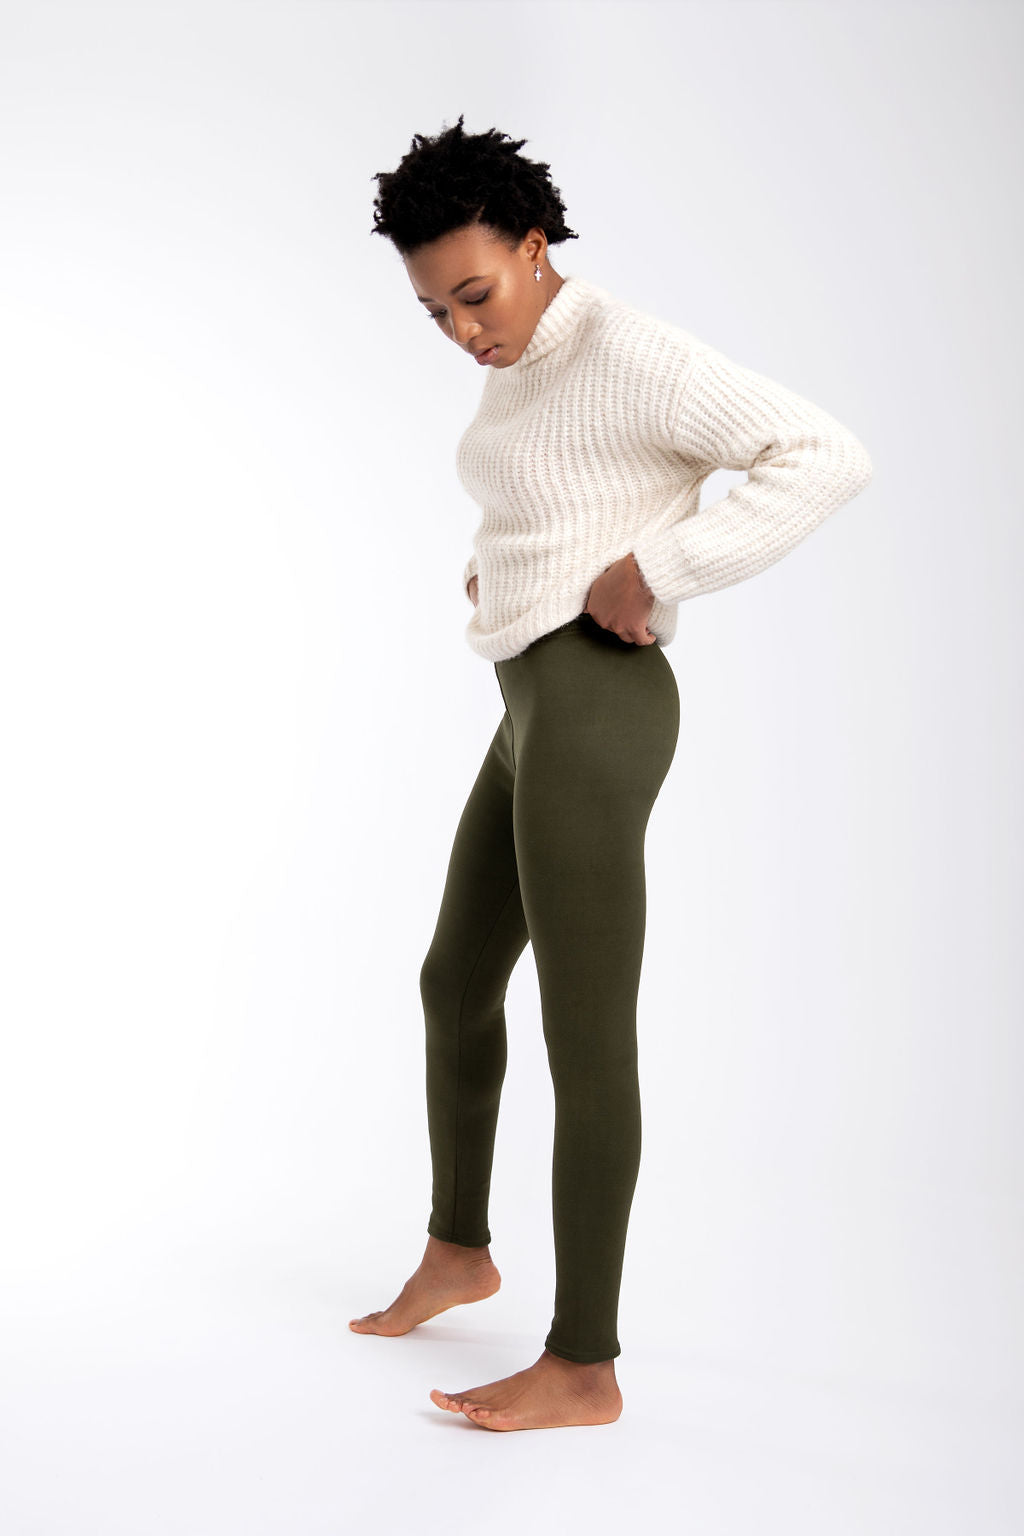 Just Cozy Leggings Reviews Google  International Society of Precision  Agriculture